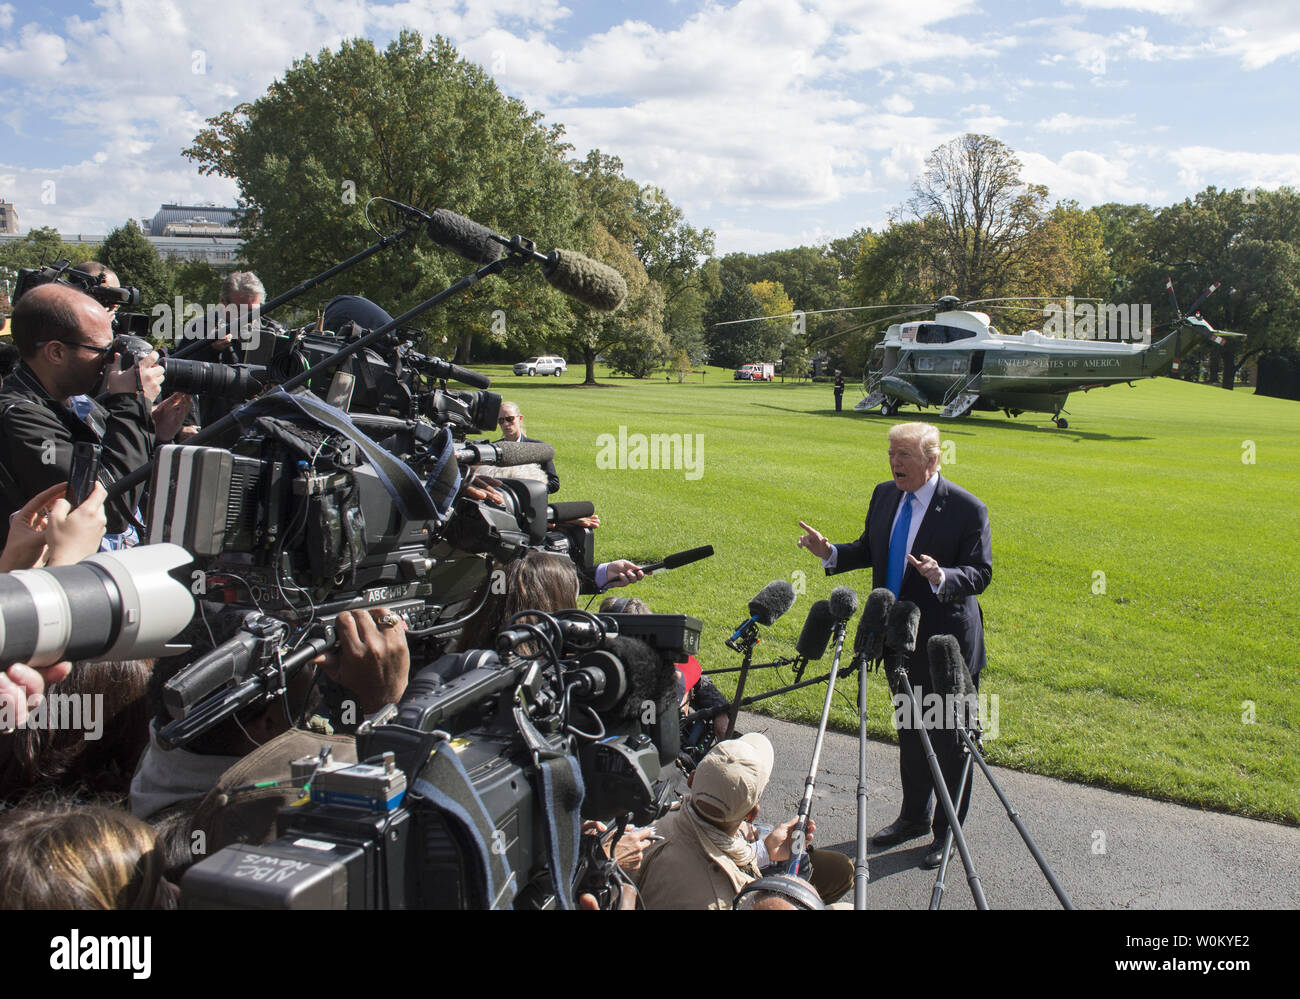 https://c8.alamy.com/comp/W0KYE2/us-president-donald-trump-answers-a-reporters-question-during-an-impromptu-press-conference-on-the-south-lawn-as-he-walks-from-the-oval-office-to-marine-one-to-depart-the-white-house-in-washington-dc-on-october-25-2017-the-president-answered-a-wide-range-of-questions-and-will-be-visiting-texas-today-photo-by-pat-benicupi-W0KYE2.jpg